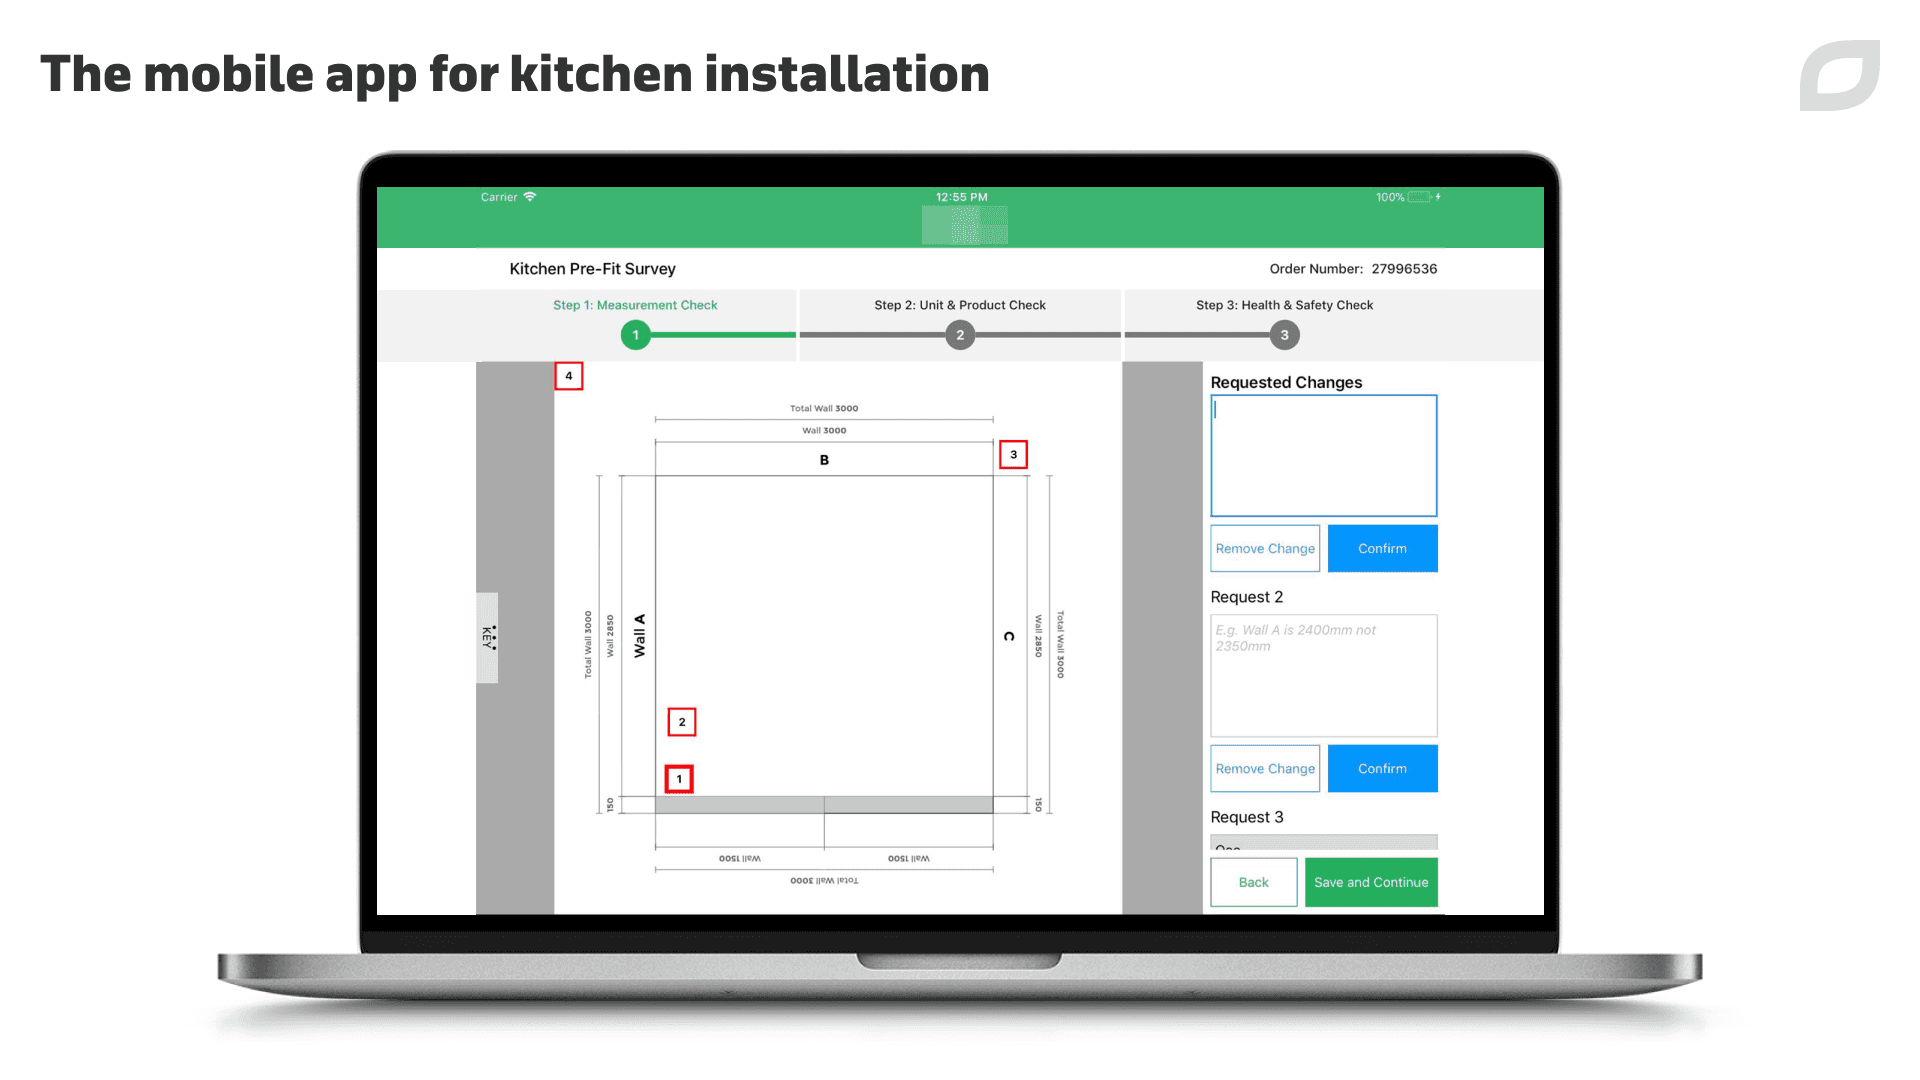 The mobile app for kitchen installation